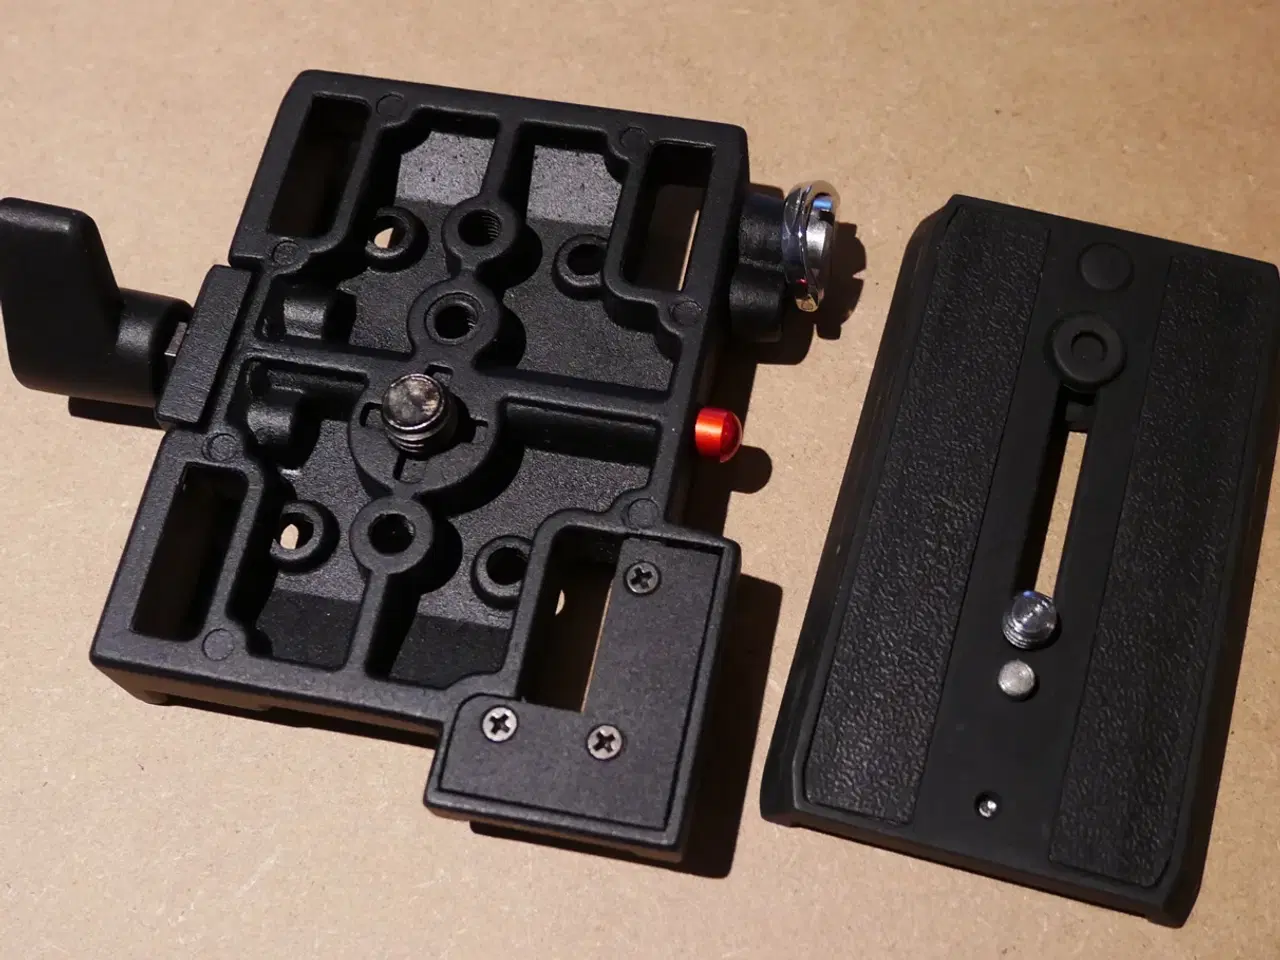 Billede 2 - Giottos mh 621 quick release plate